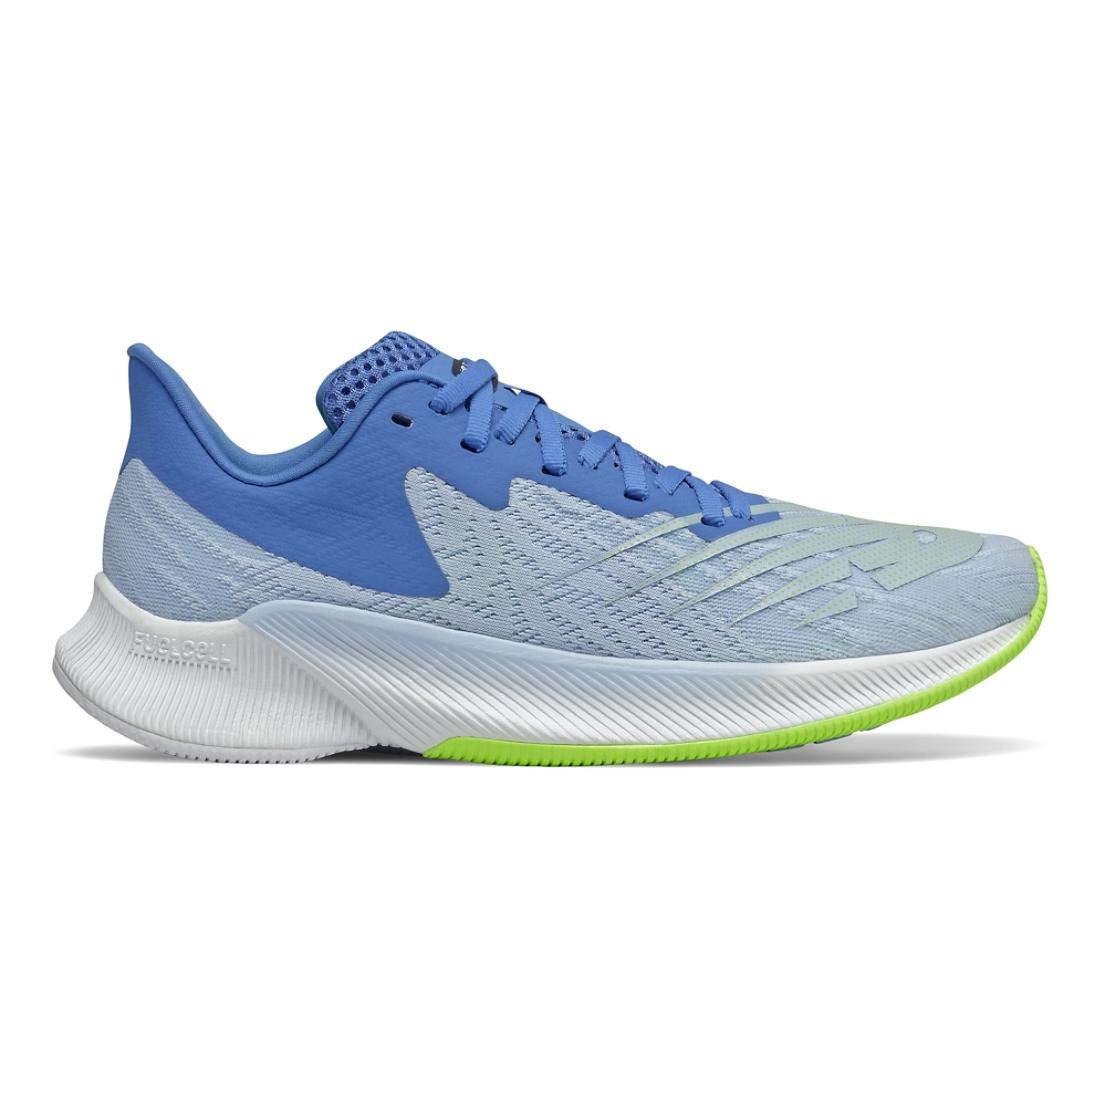 New Balance Fuelcell Prism V1 Running Shoe in Blue/Green (Blue) - Lyst